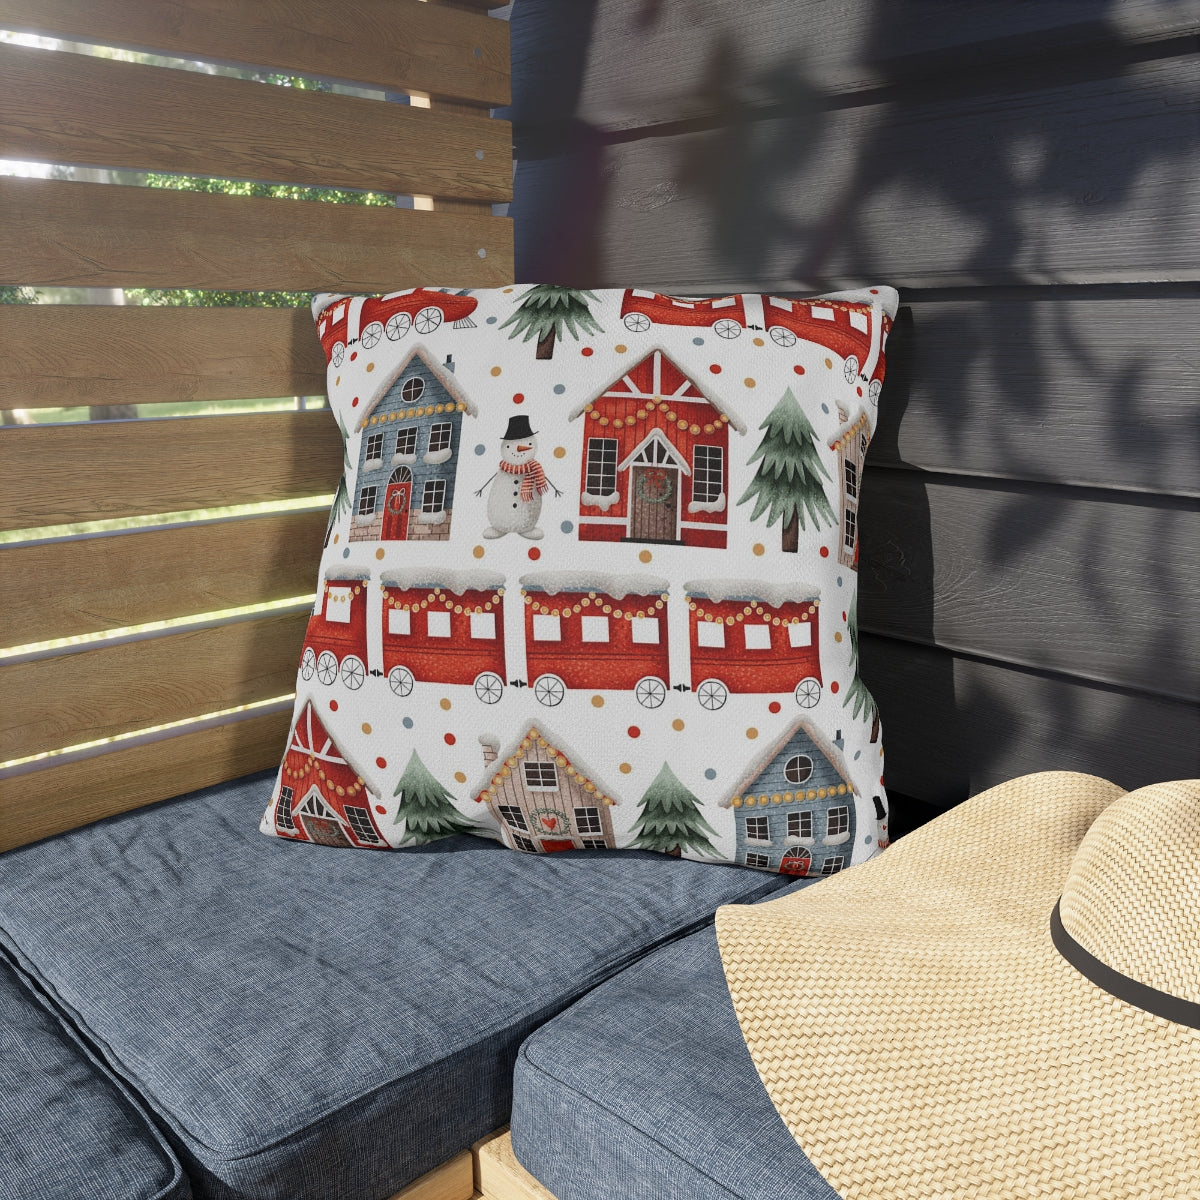 Christmas Trains and Houses Outdoor Pillow